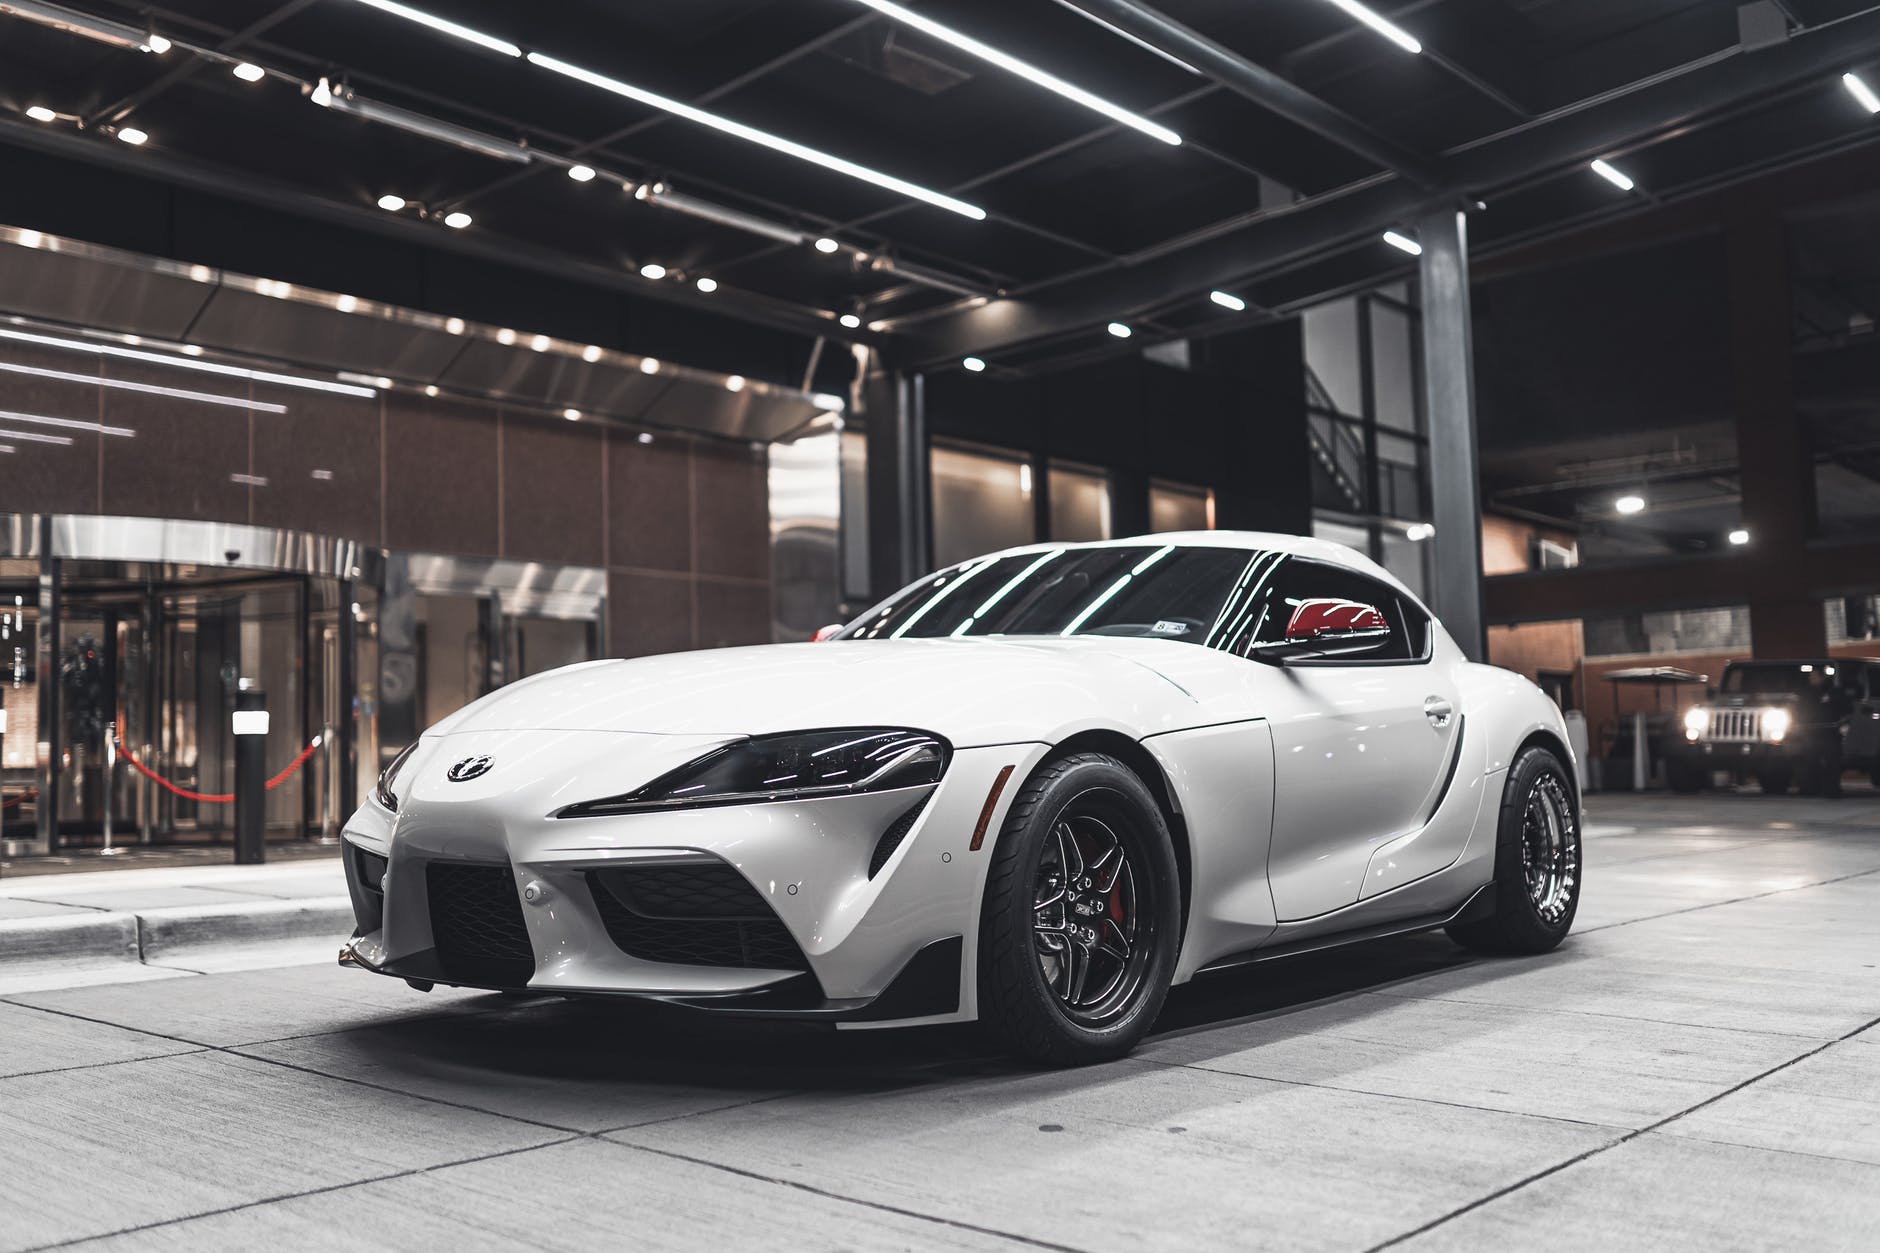 A Toyota Supra, a far cry from the 2021 Toyota Sienna.